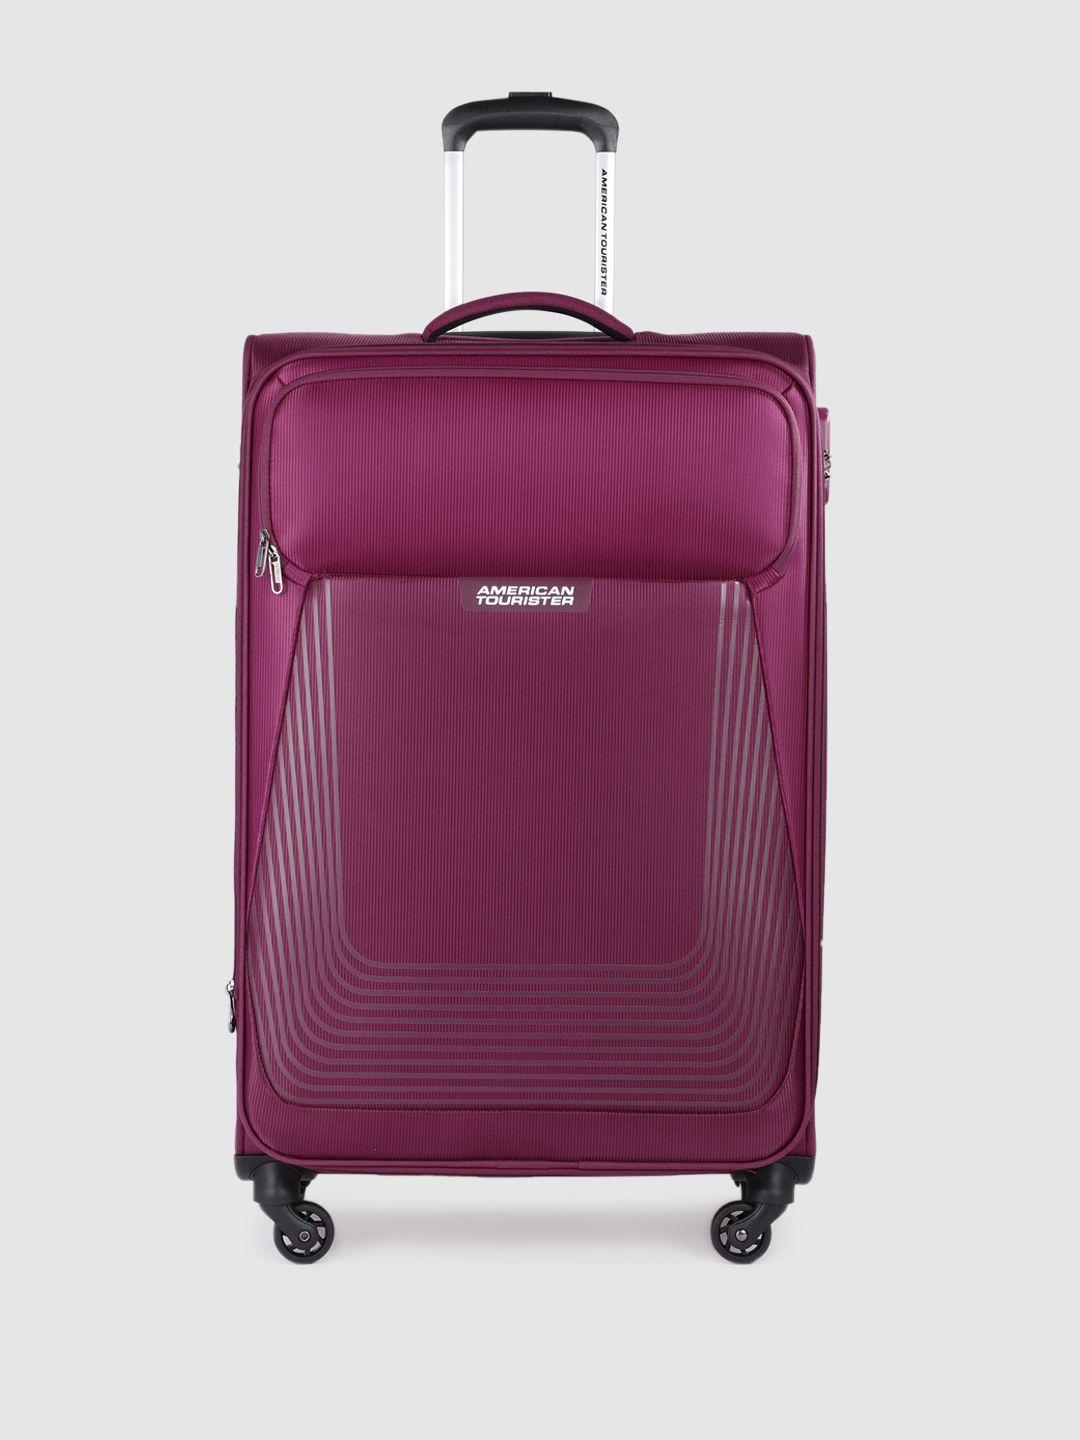 american tourister striped large trolley suitcase